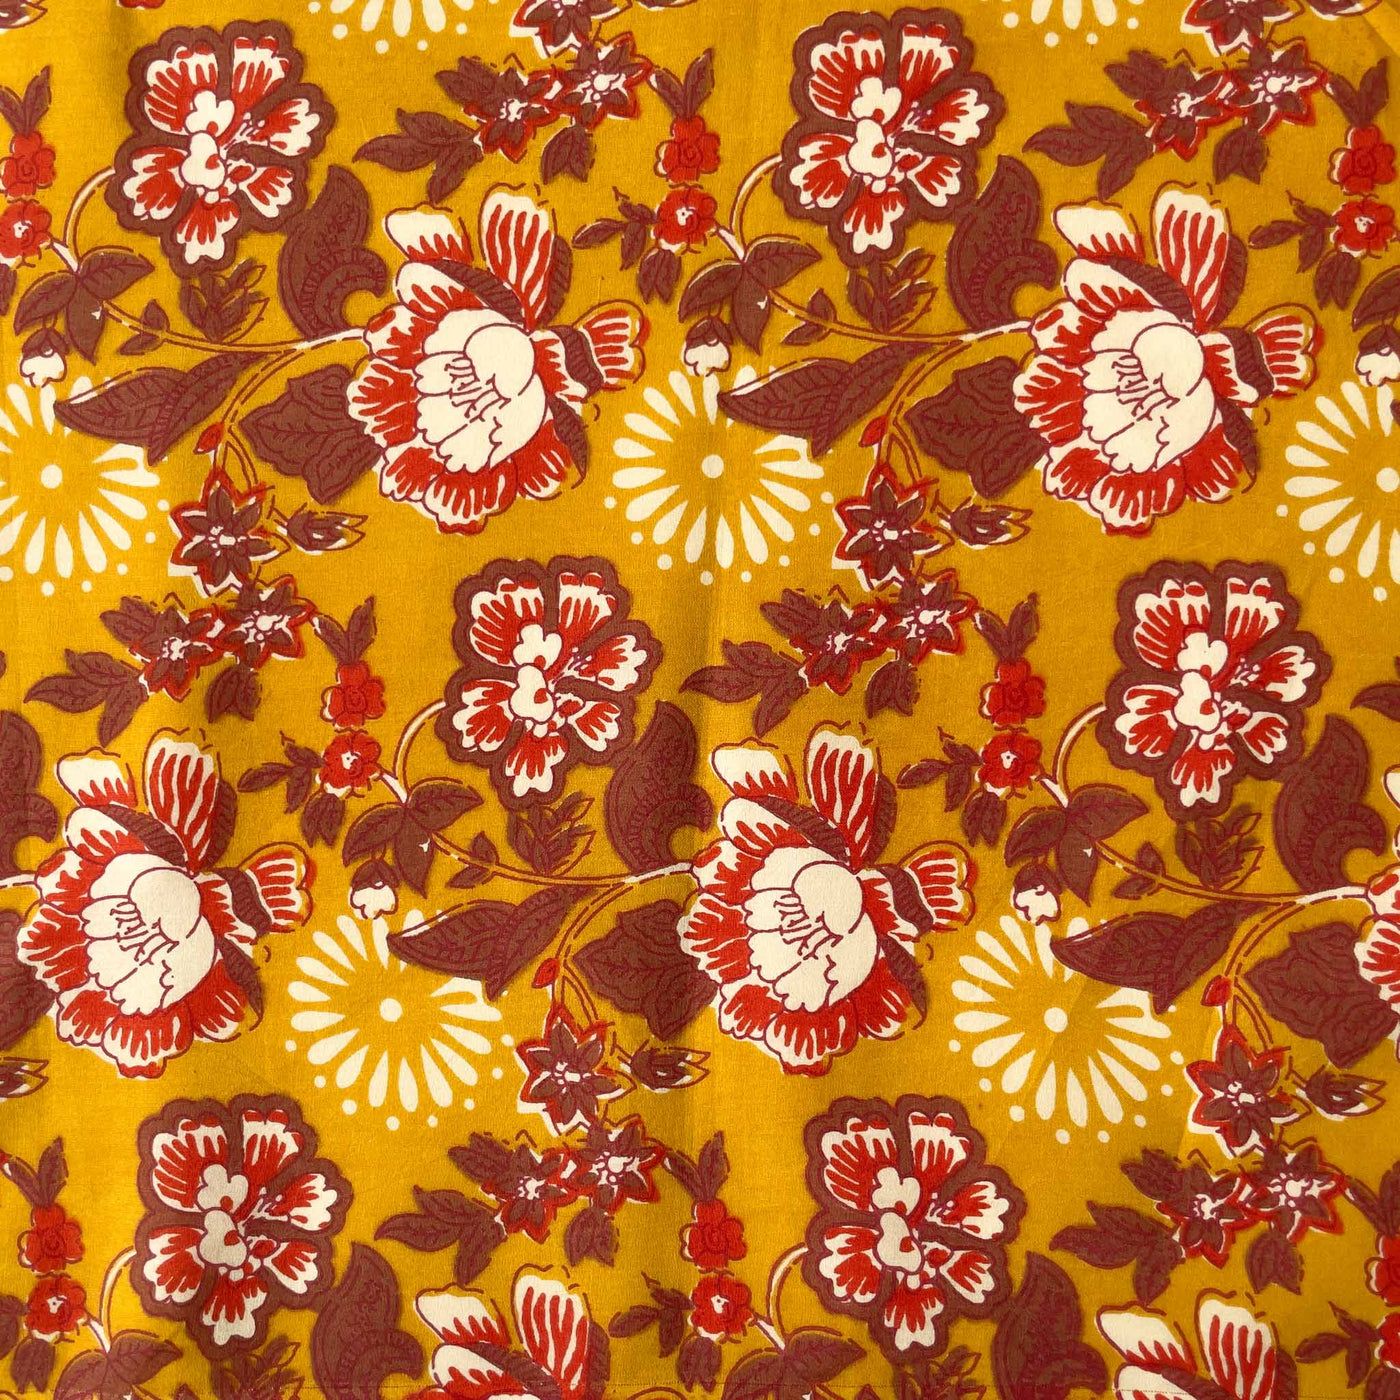 Screen Printed Cotton Fabric Cut Piece (CUT PIECE) Mustard Yellow & Brown Abstract Floral Screen Printed Pure Cotton Fabric (Width 43 inches)